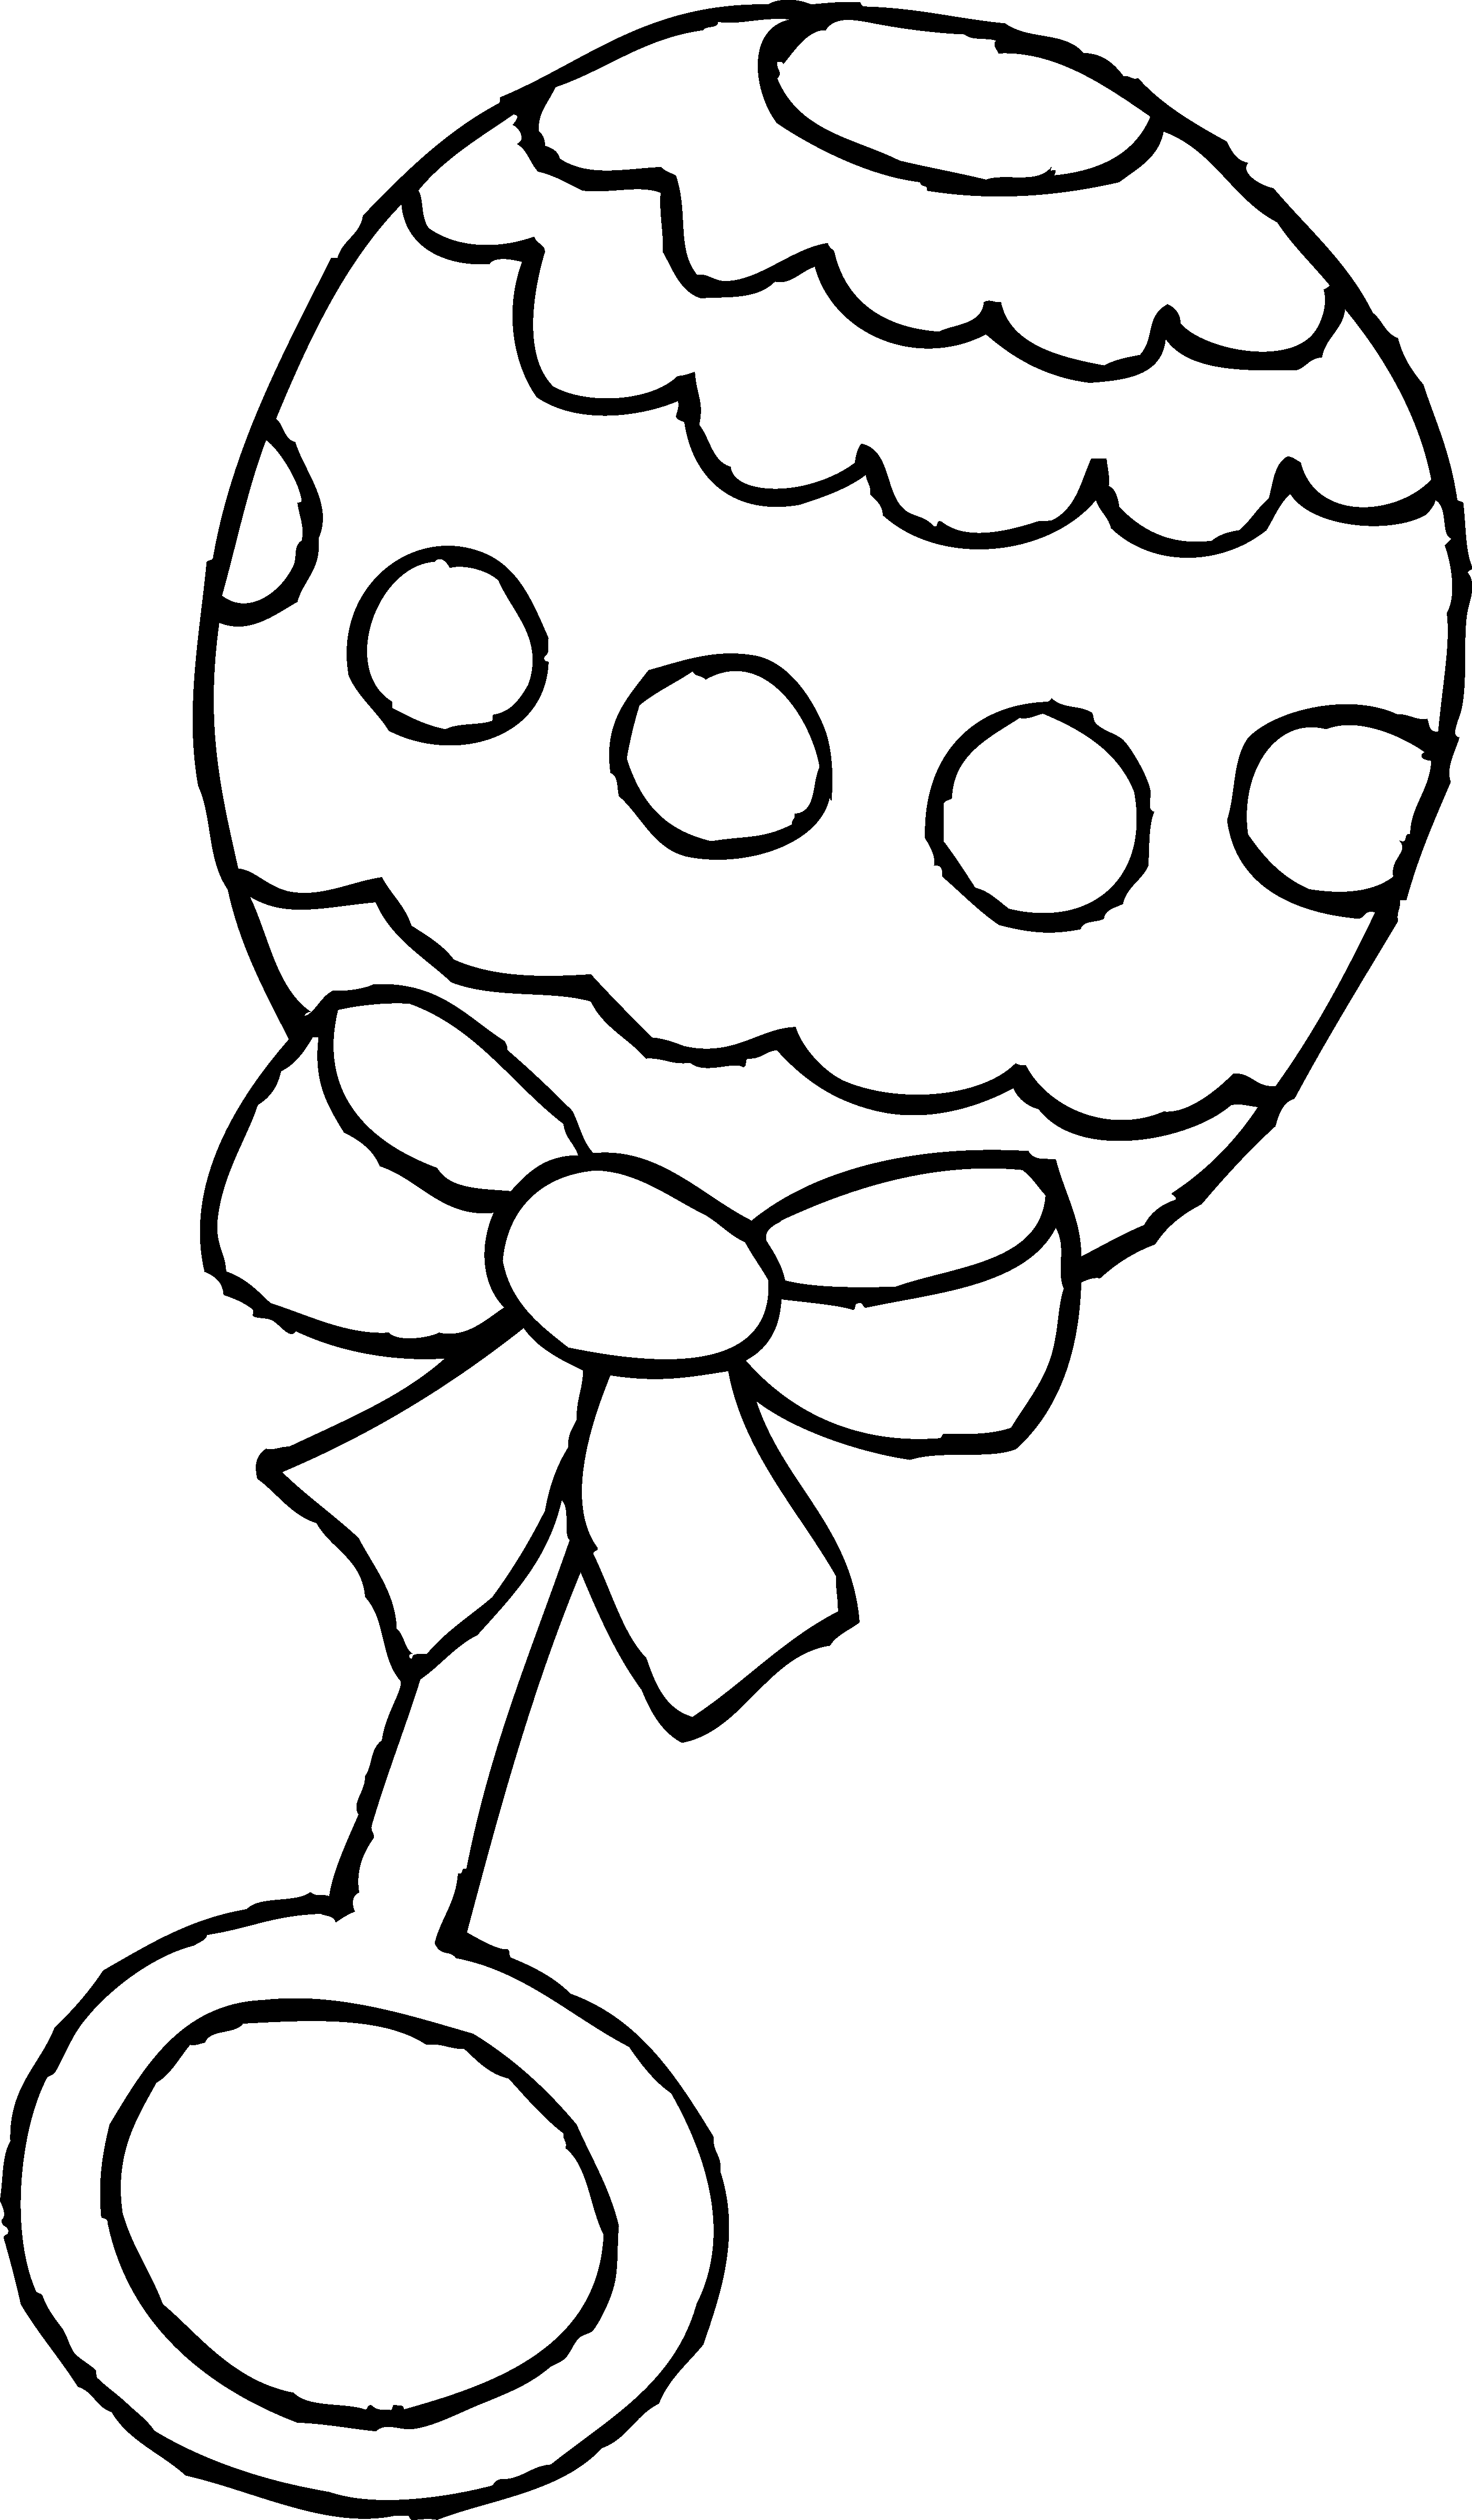 Baby Rattle Clip Art Black and White